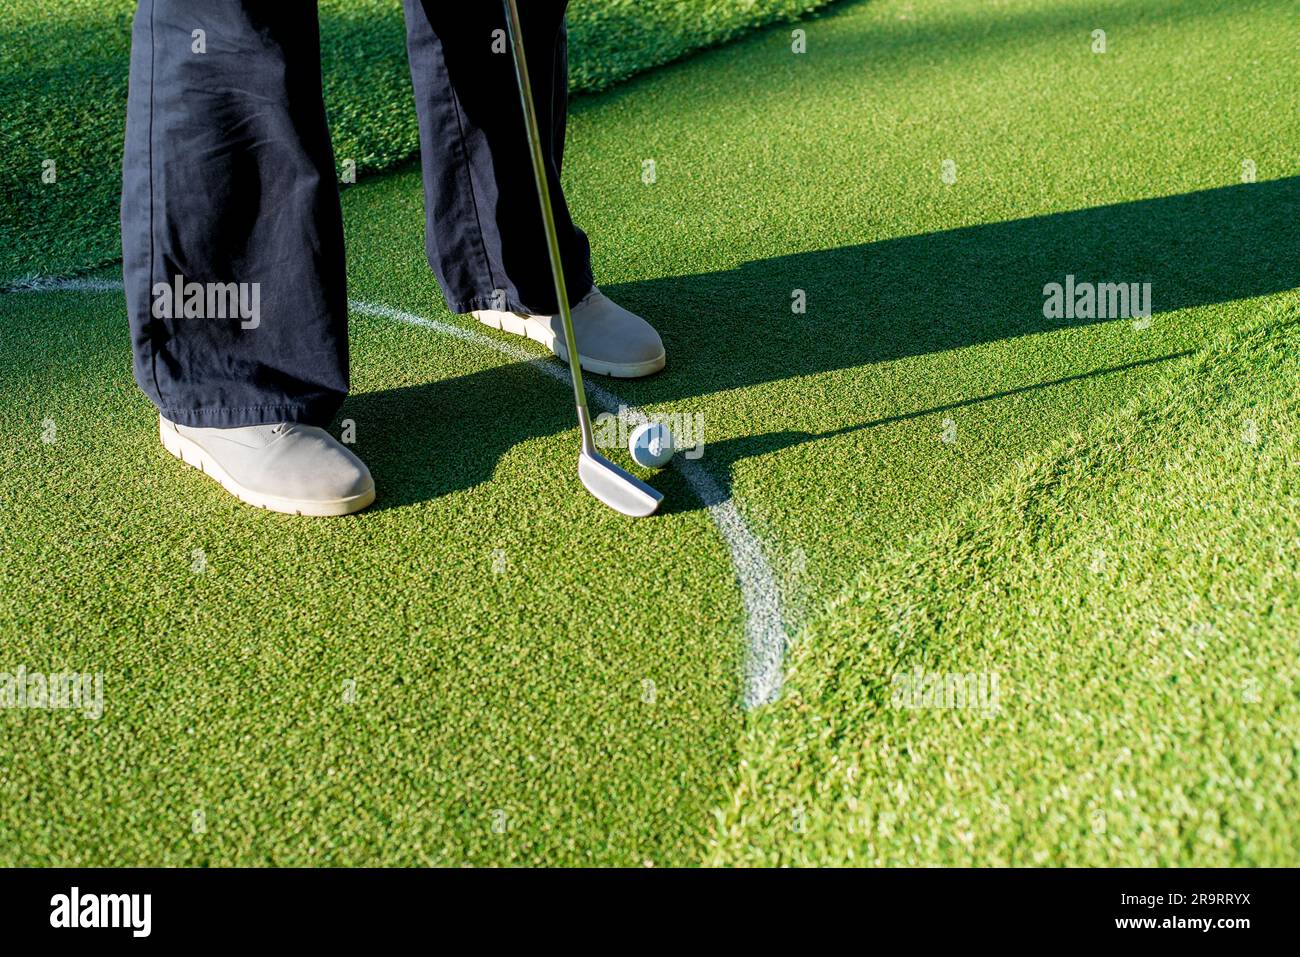 Mini Golf player with grey sneakers putting golf ball into the hole on green lane. Stock Photo